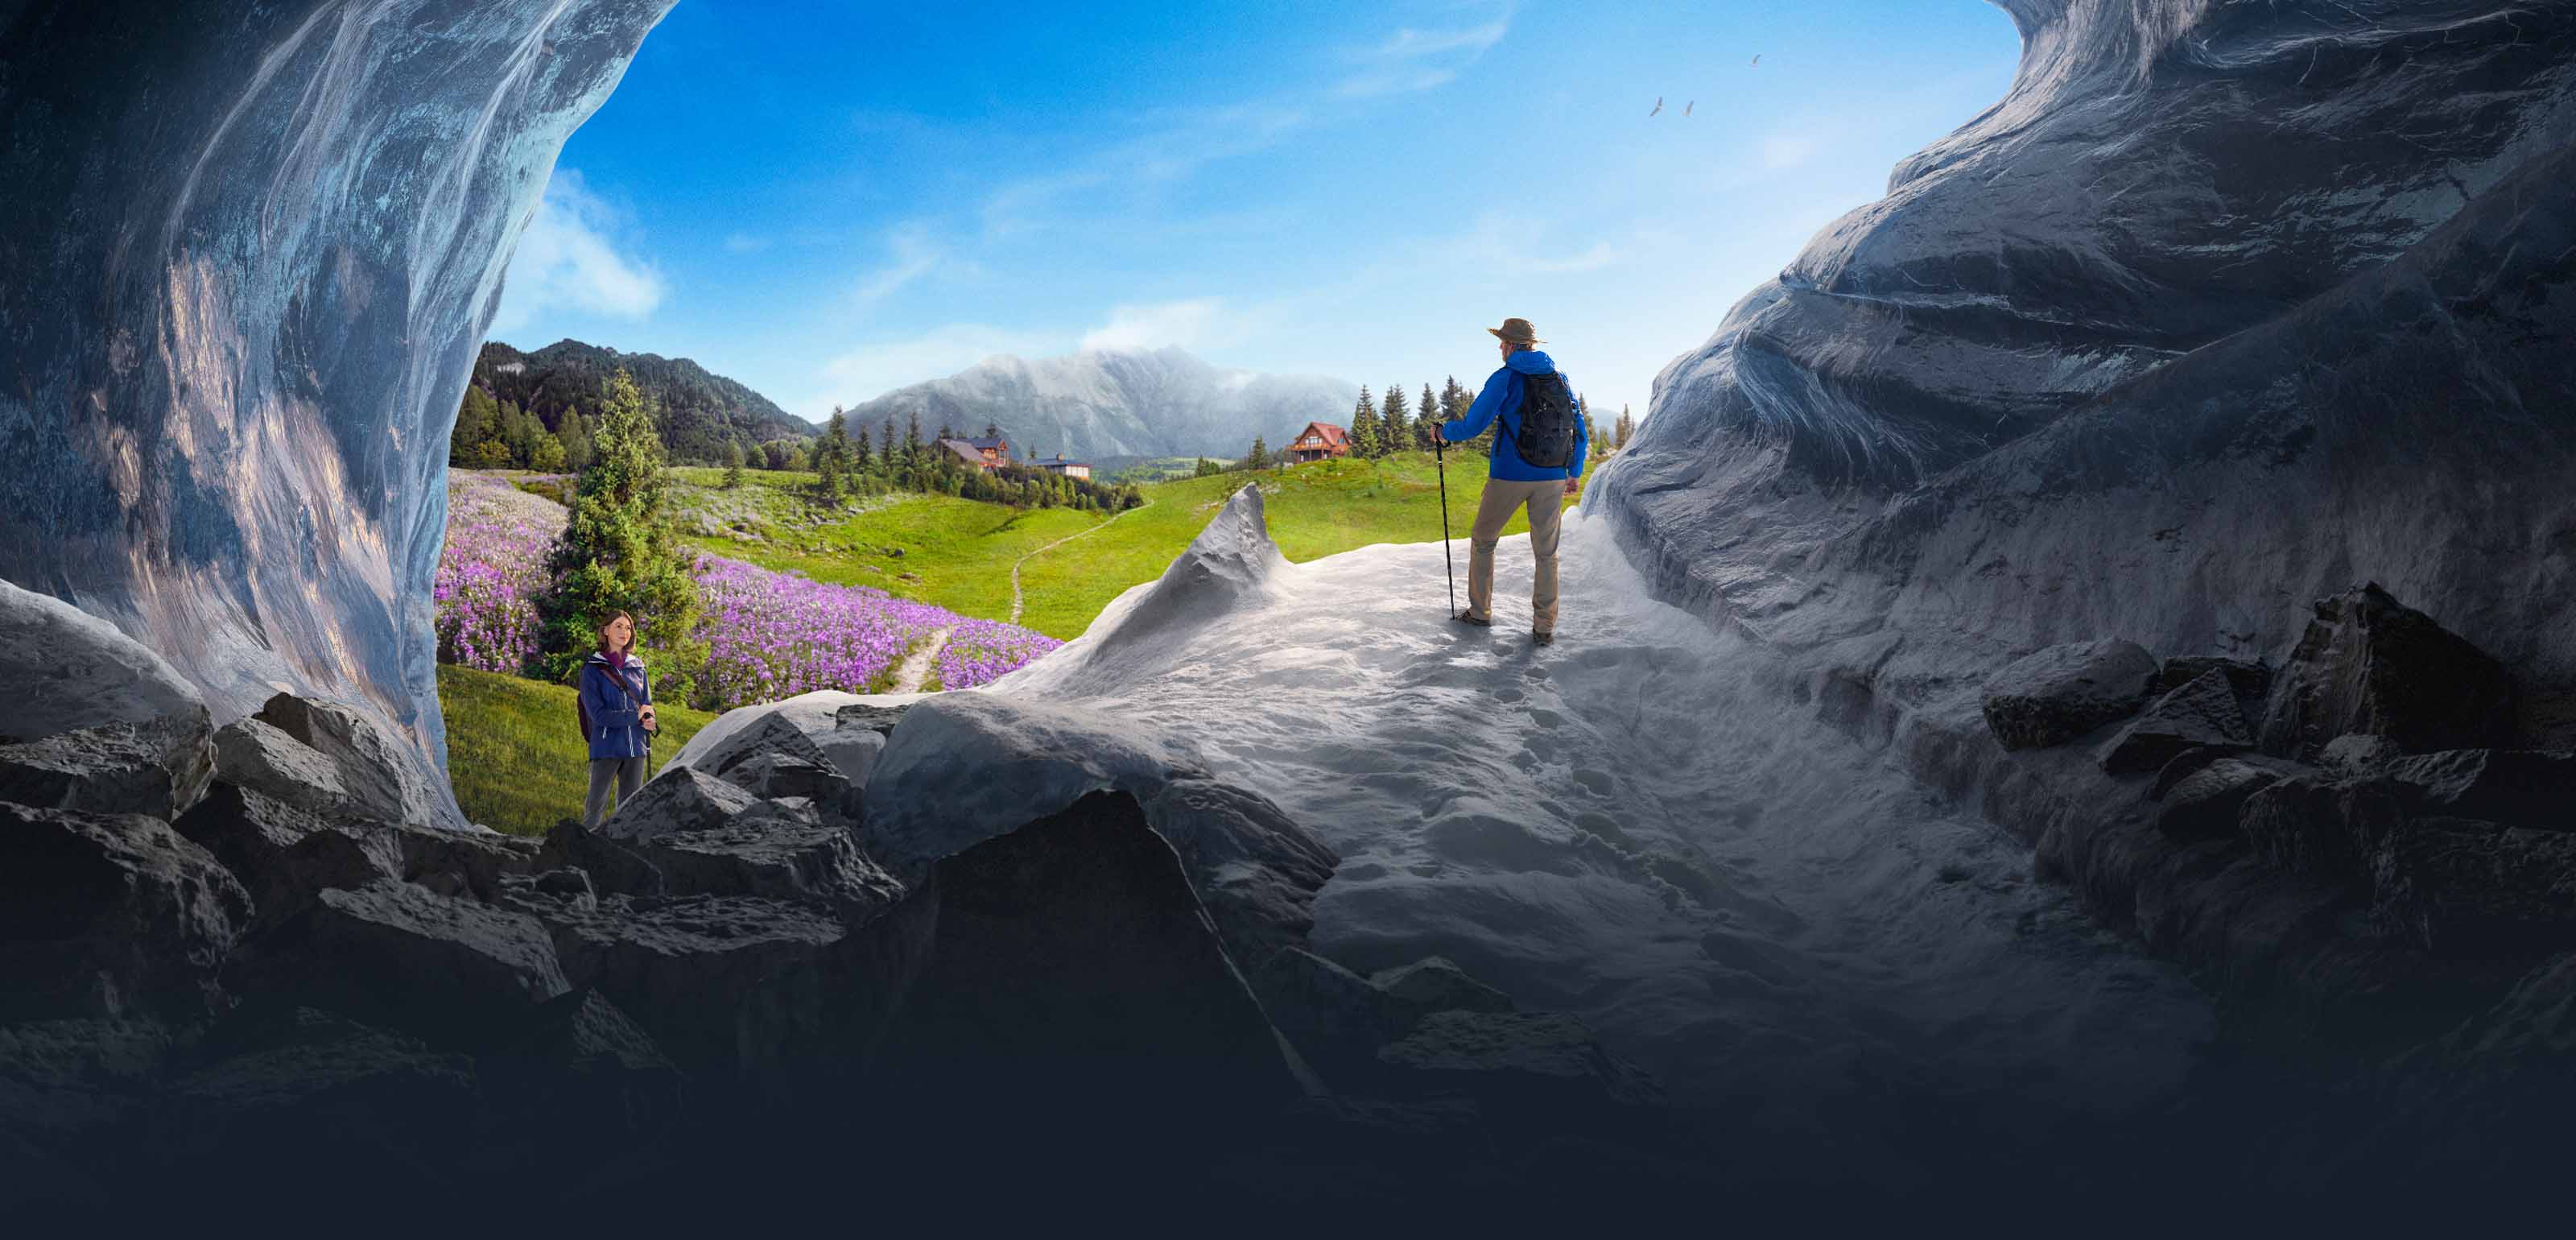 Novel t-cell therapy ad campaign for Kimmtrak. Image of a hiker emerging from a large ice cave